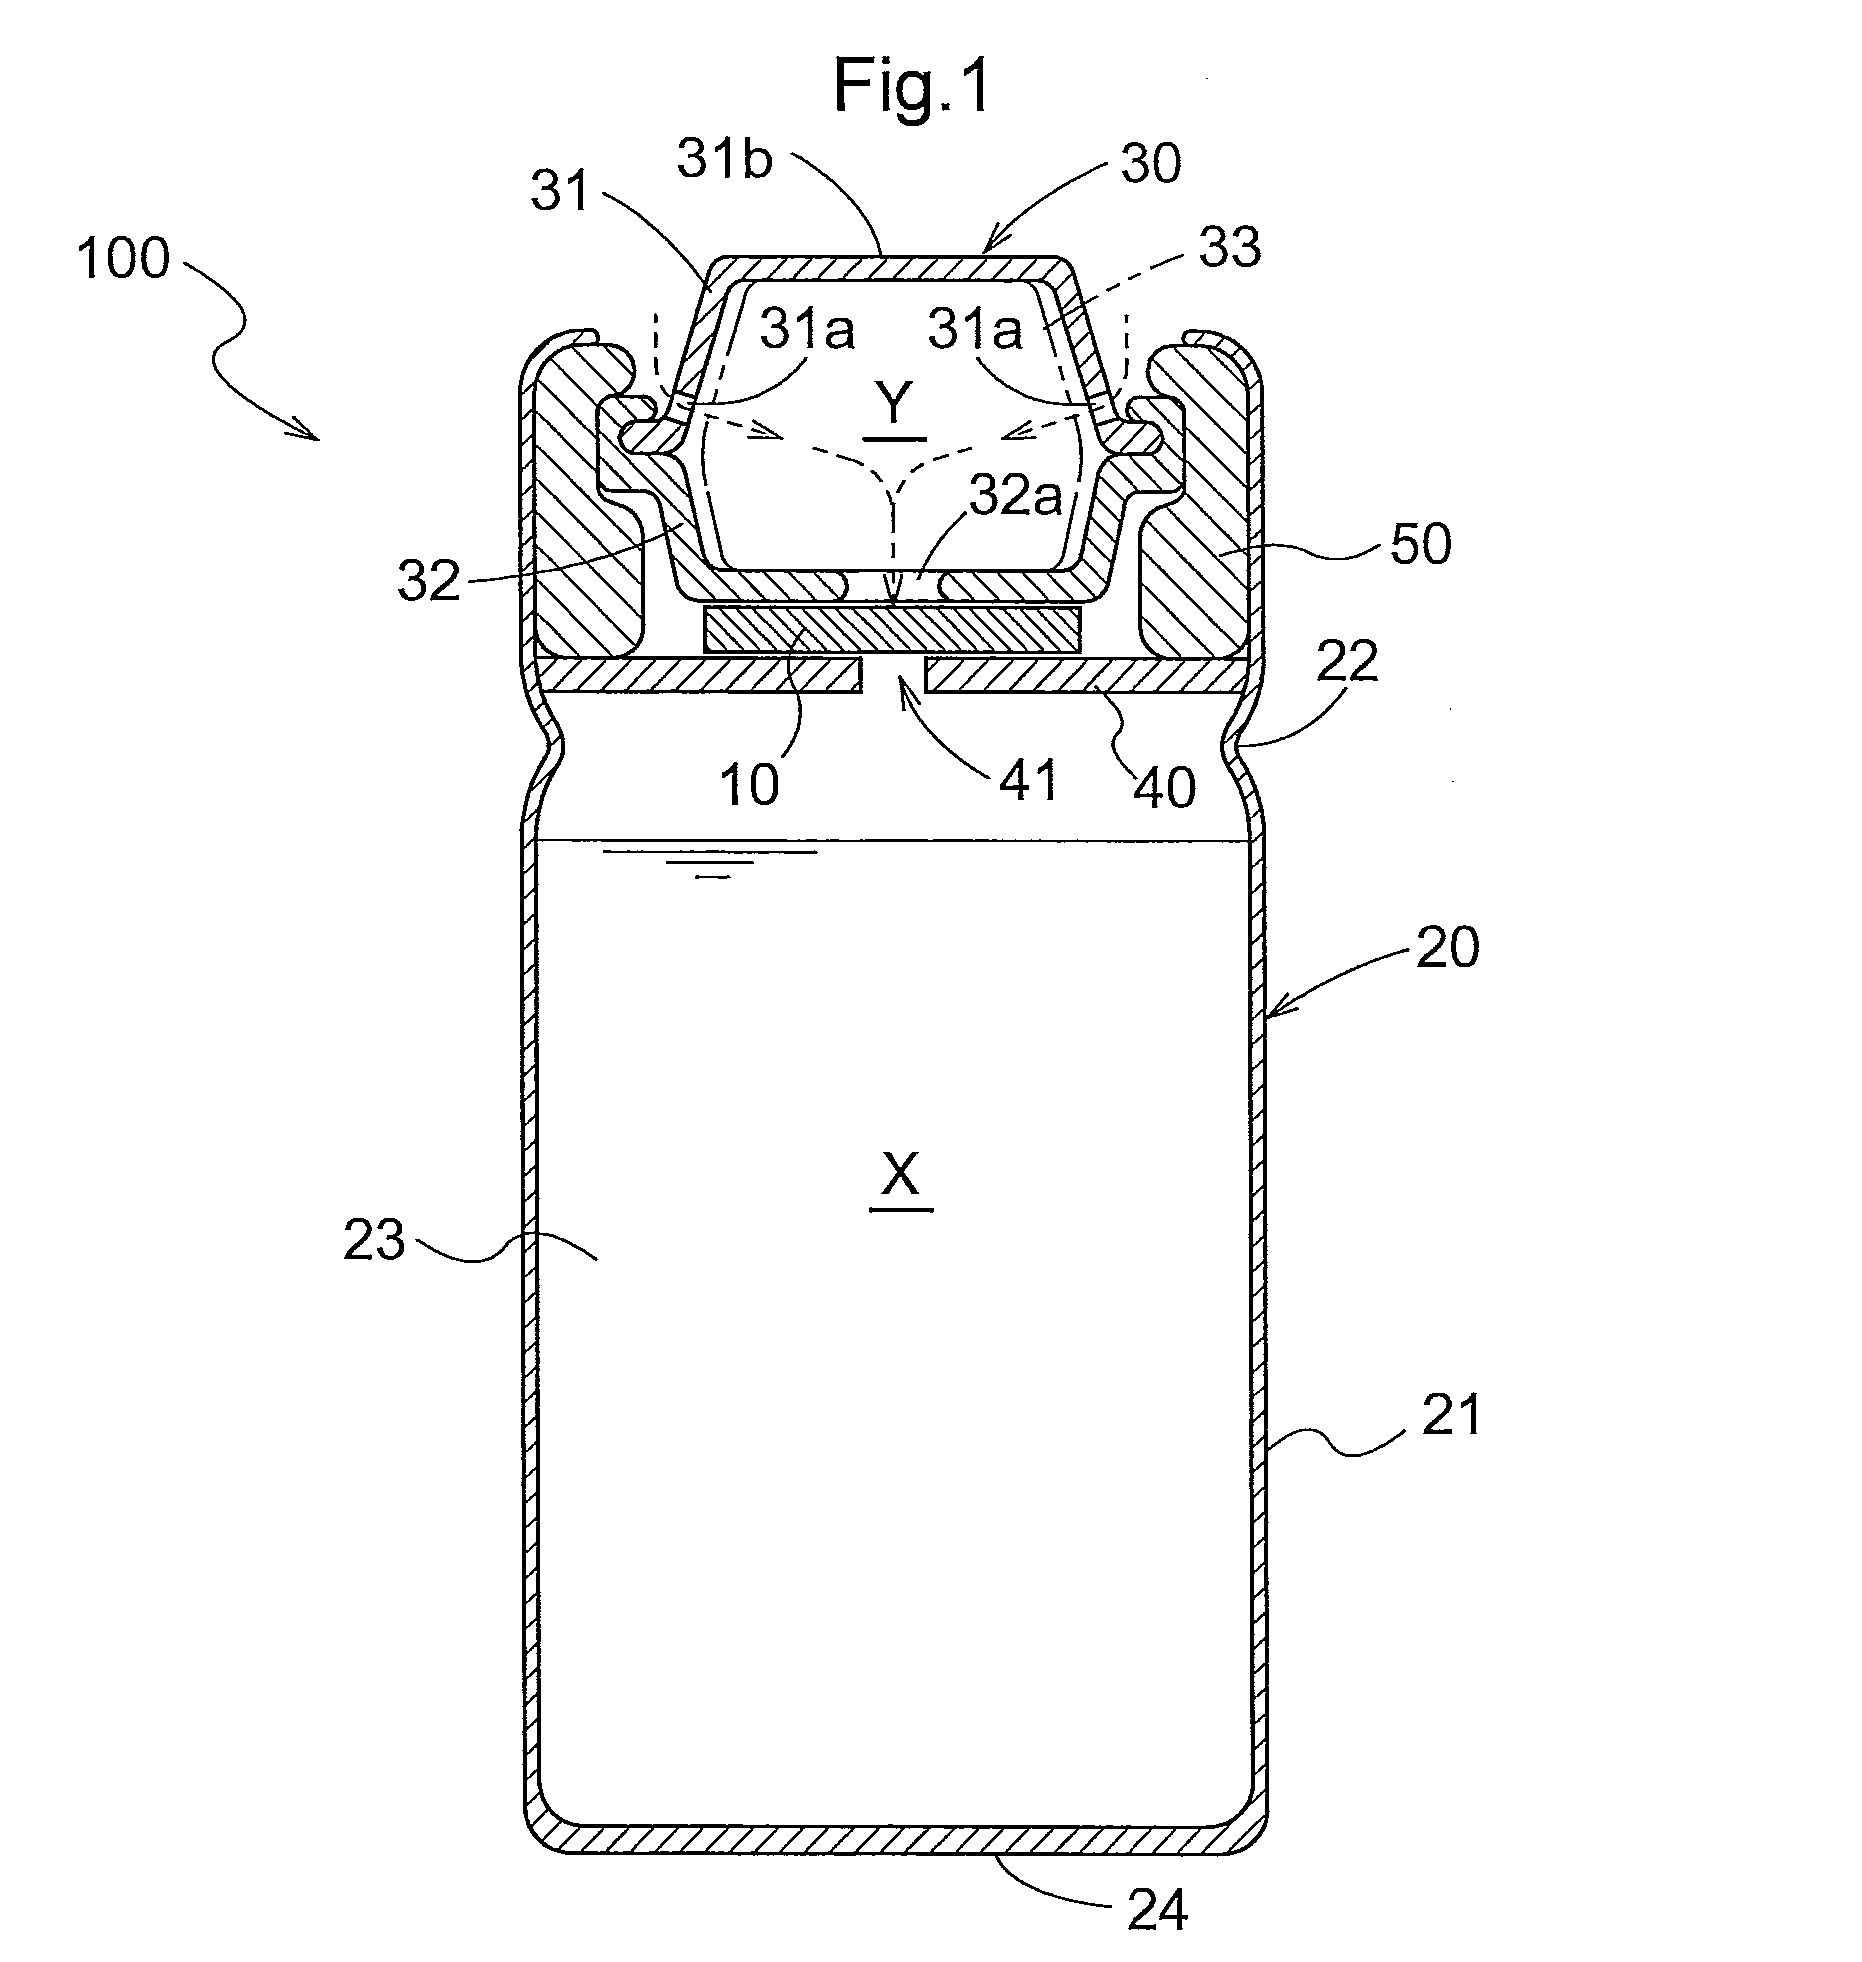 Method and apparatus for diagnosing electrochemical sensor